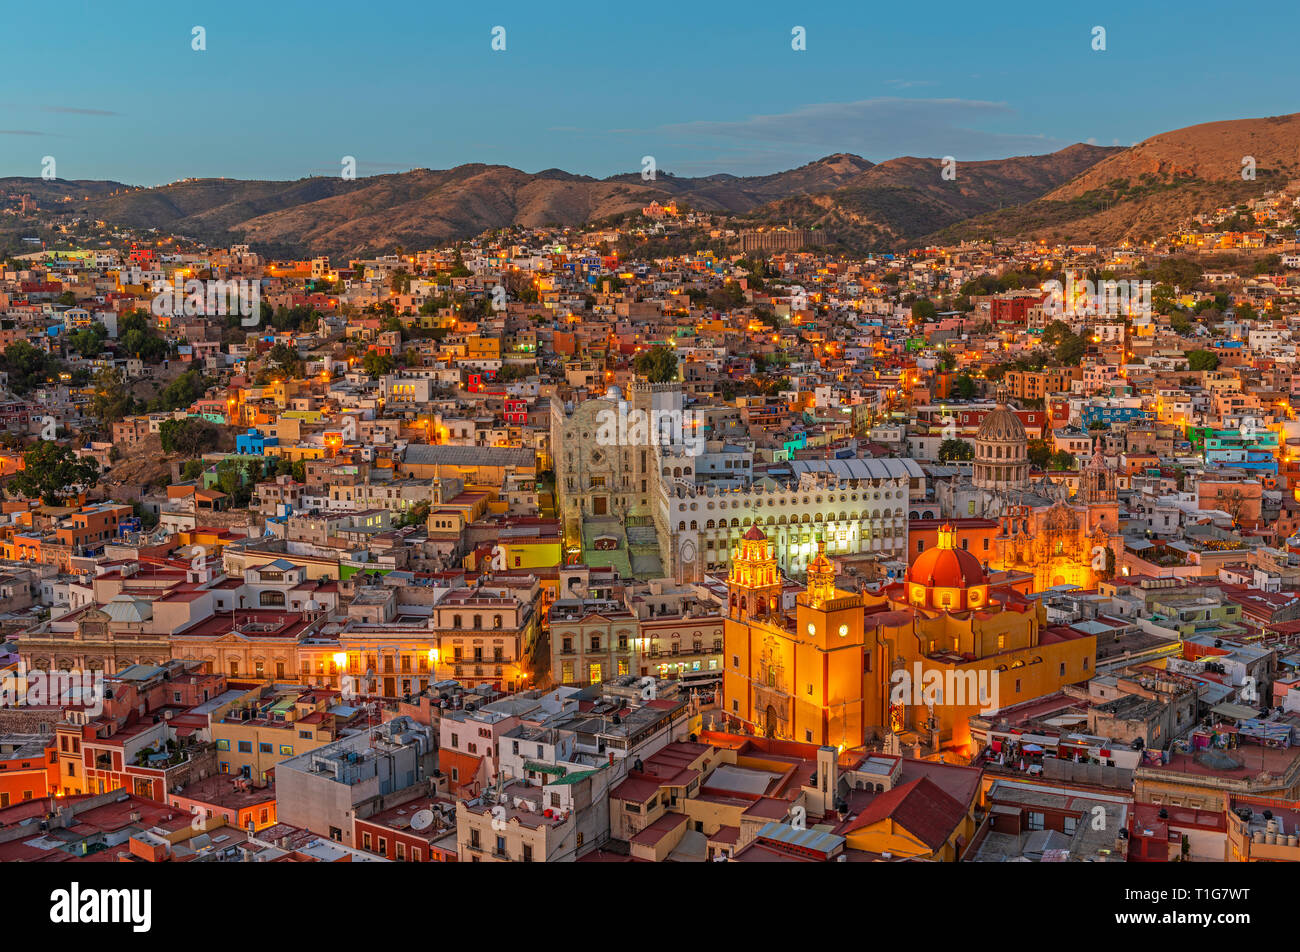 Wide angle cityscape of Guanajuato city during the blue hour with the Basilica of Our Lady of Guanajuato, Mexico. Stock Photo